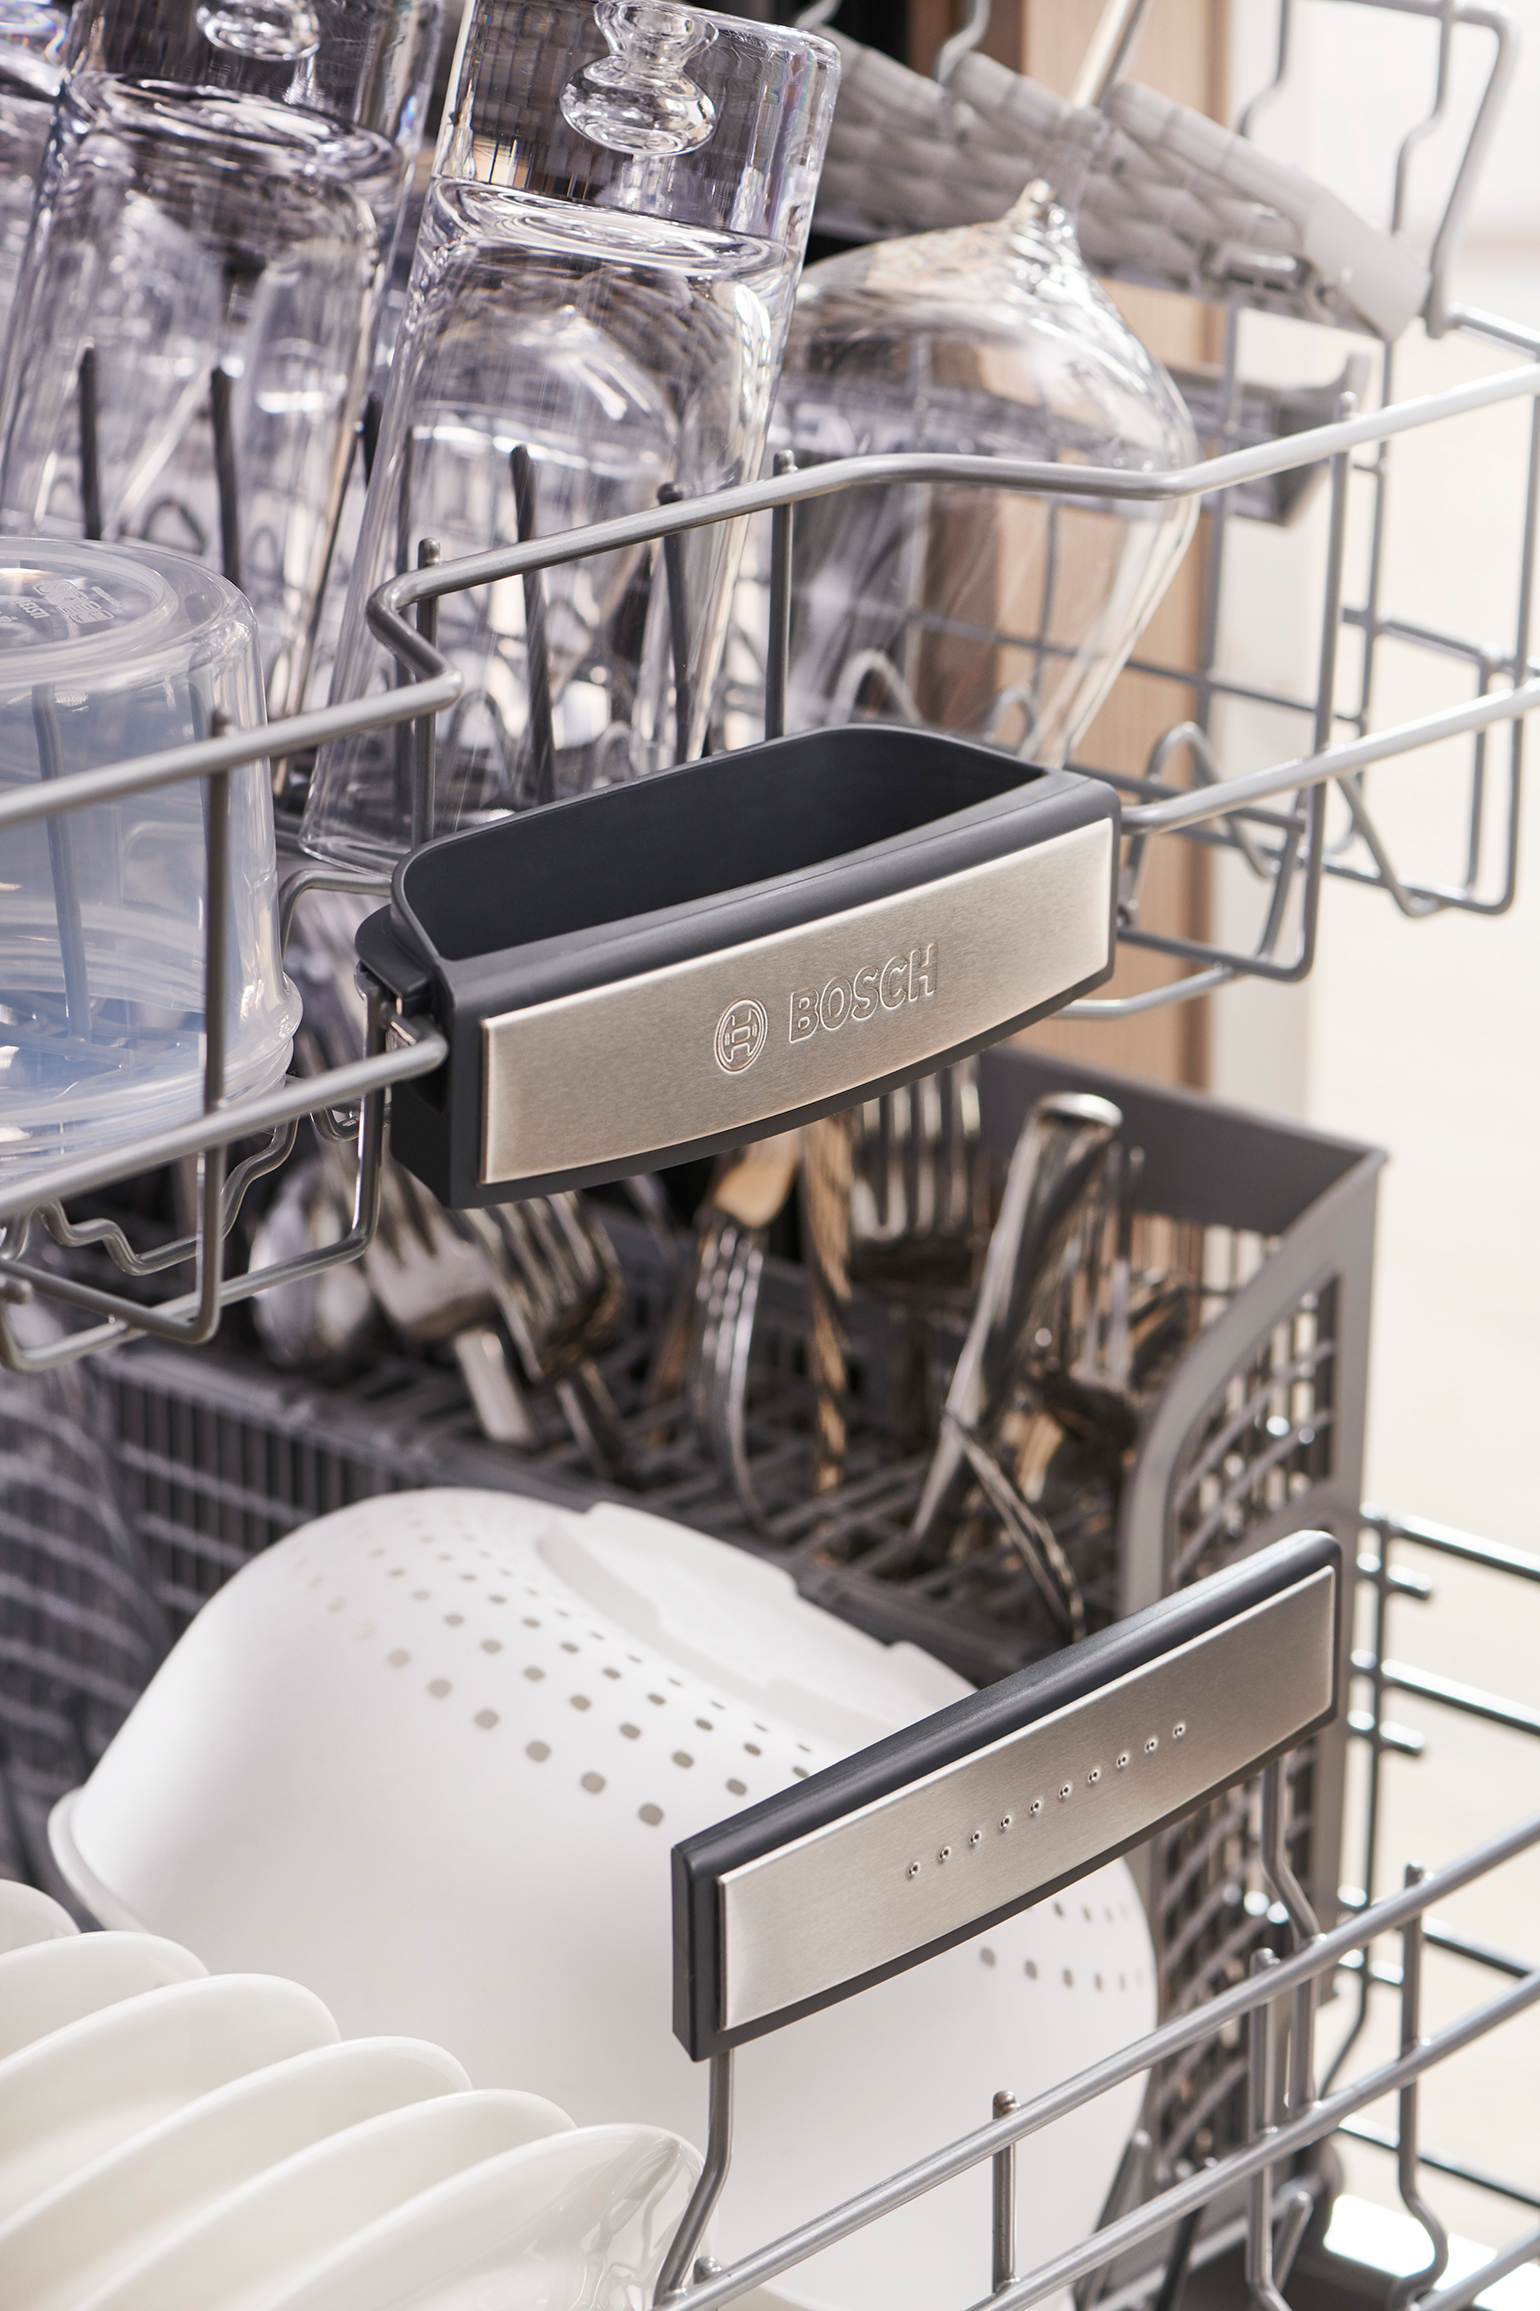 Upgrade Your Dishwasher with the Bosch 800 from Best Buy